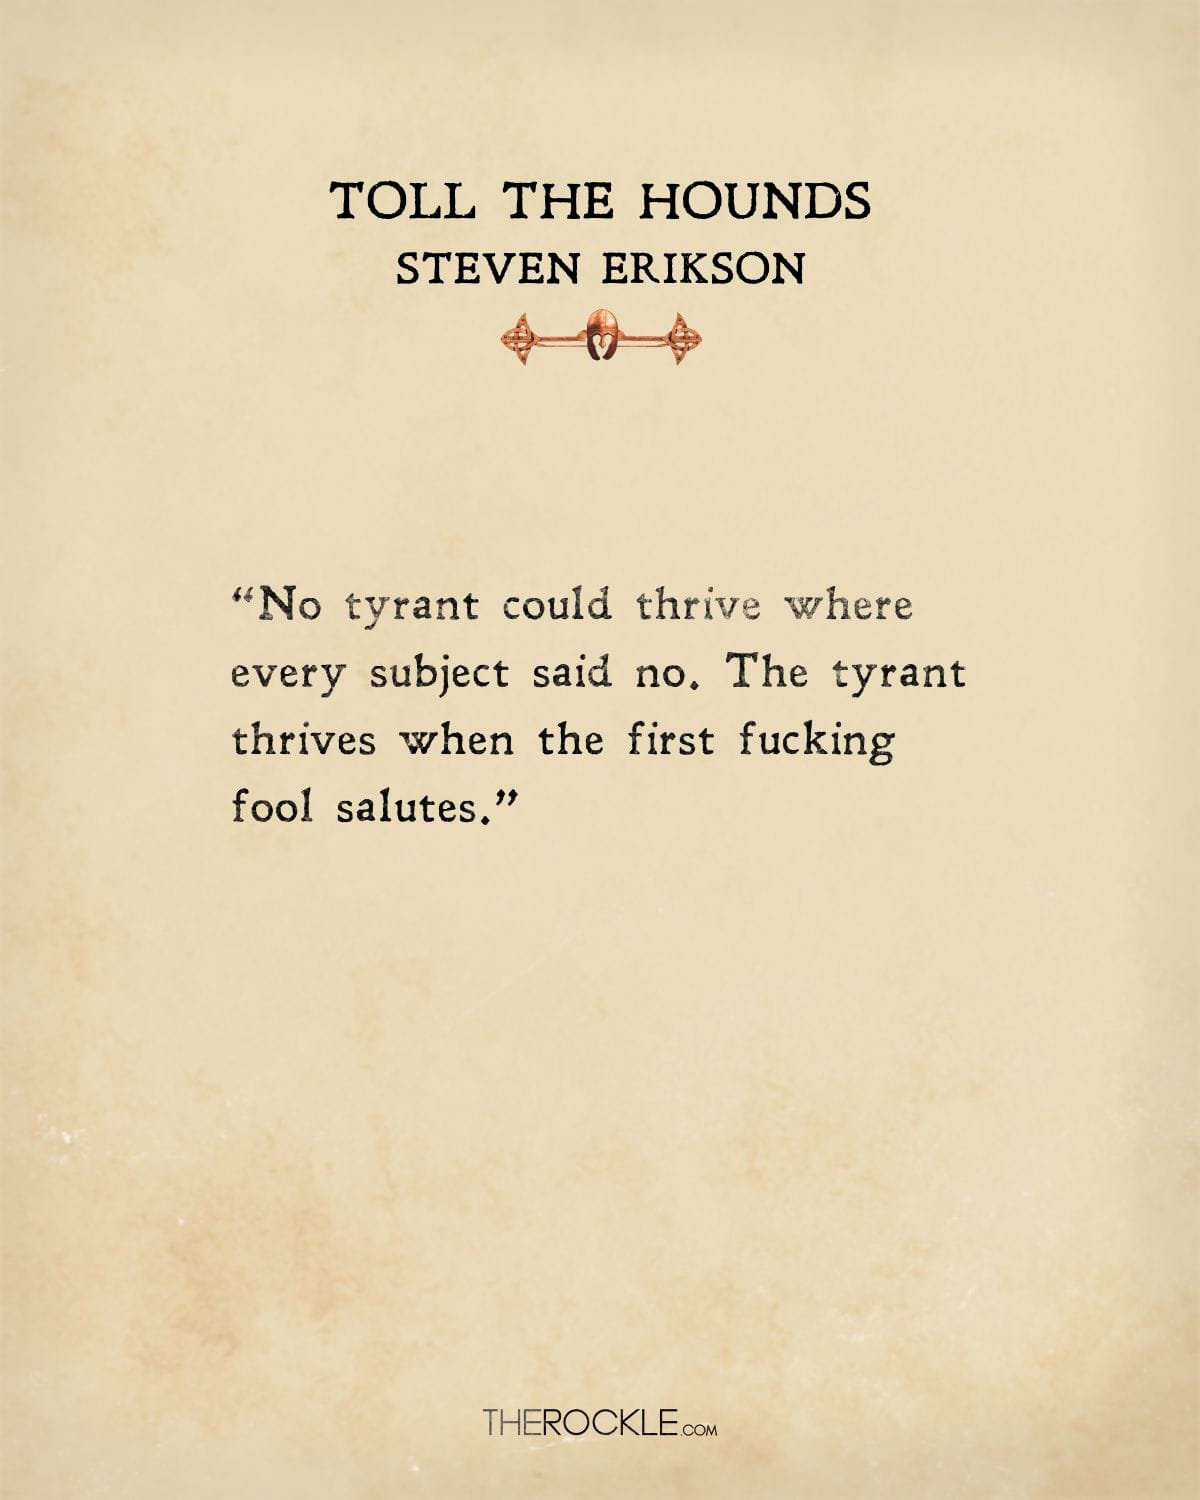 Steven Erikson quote from Toll the Hounds